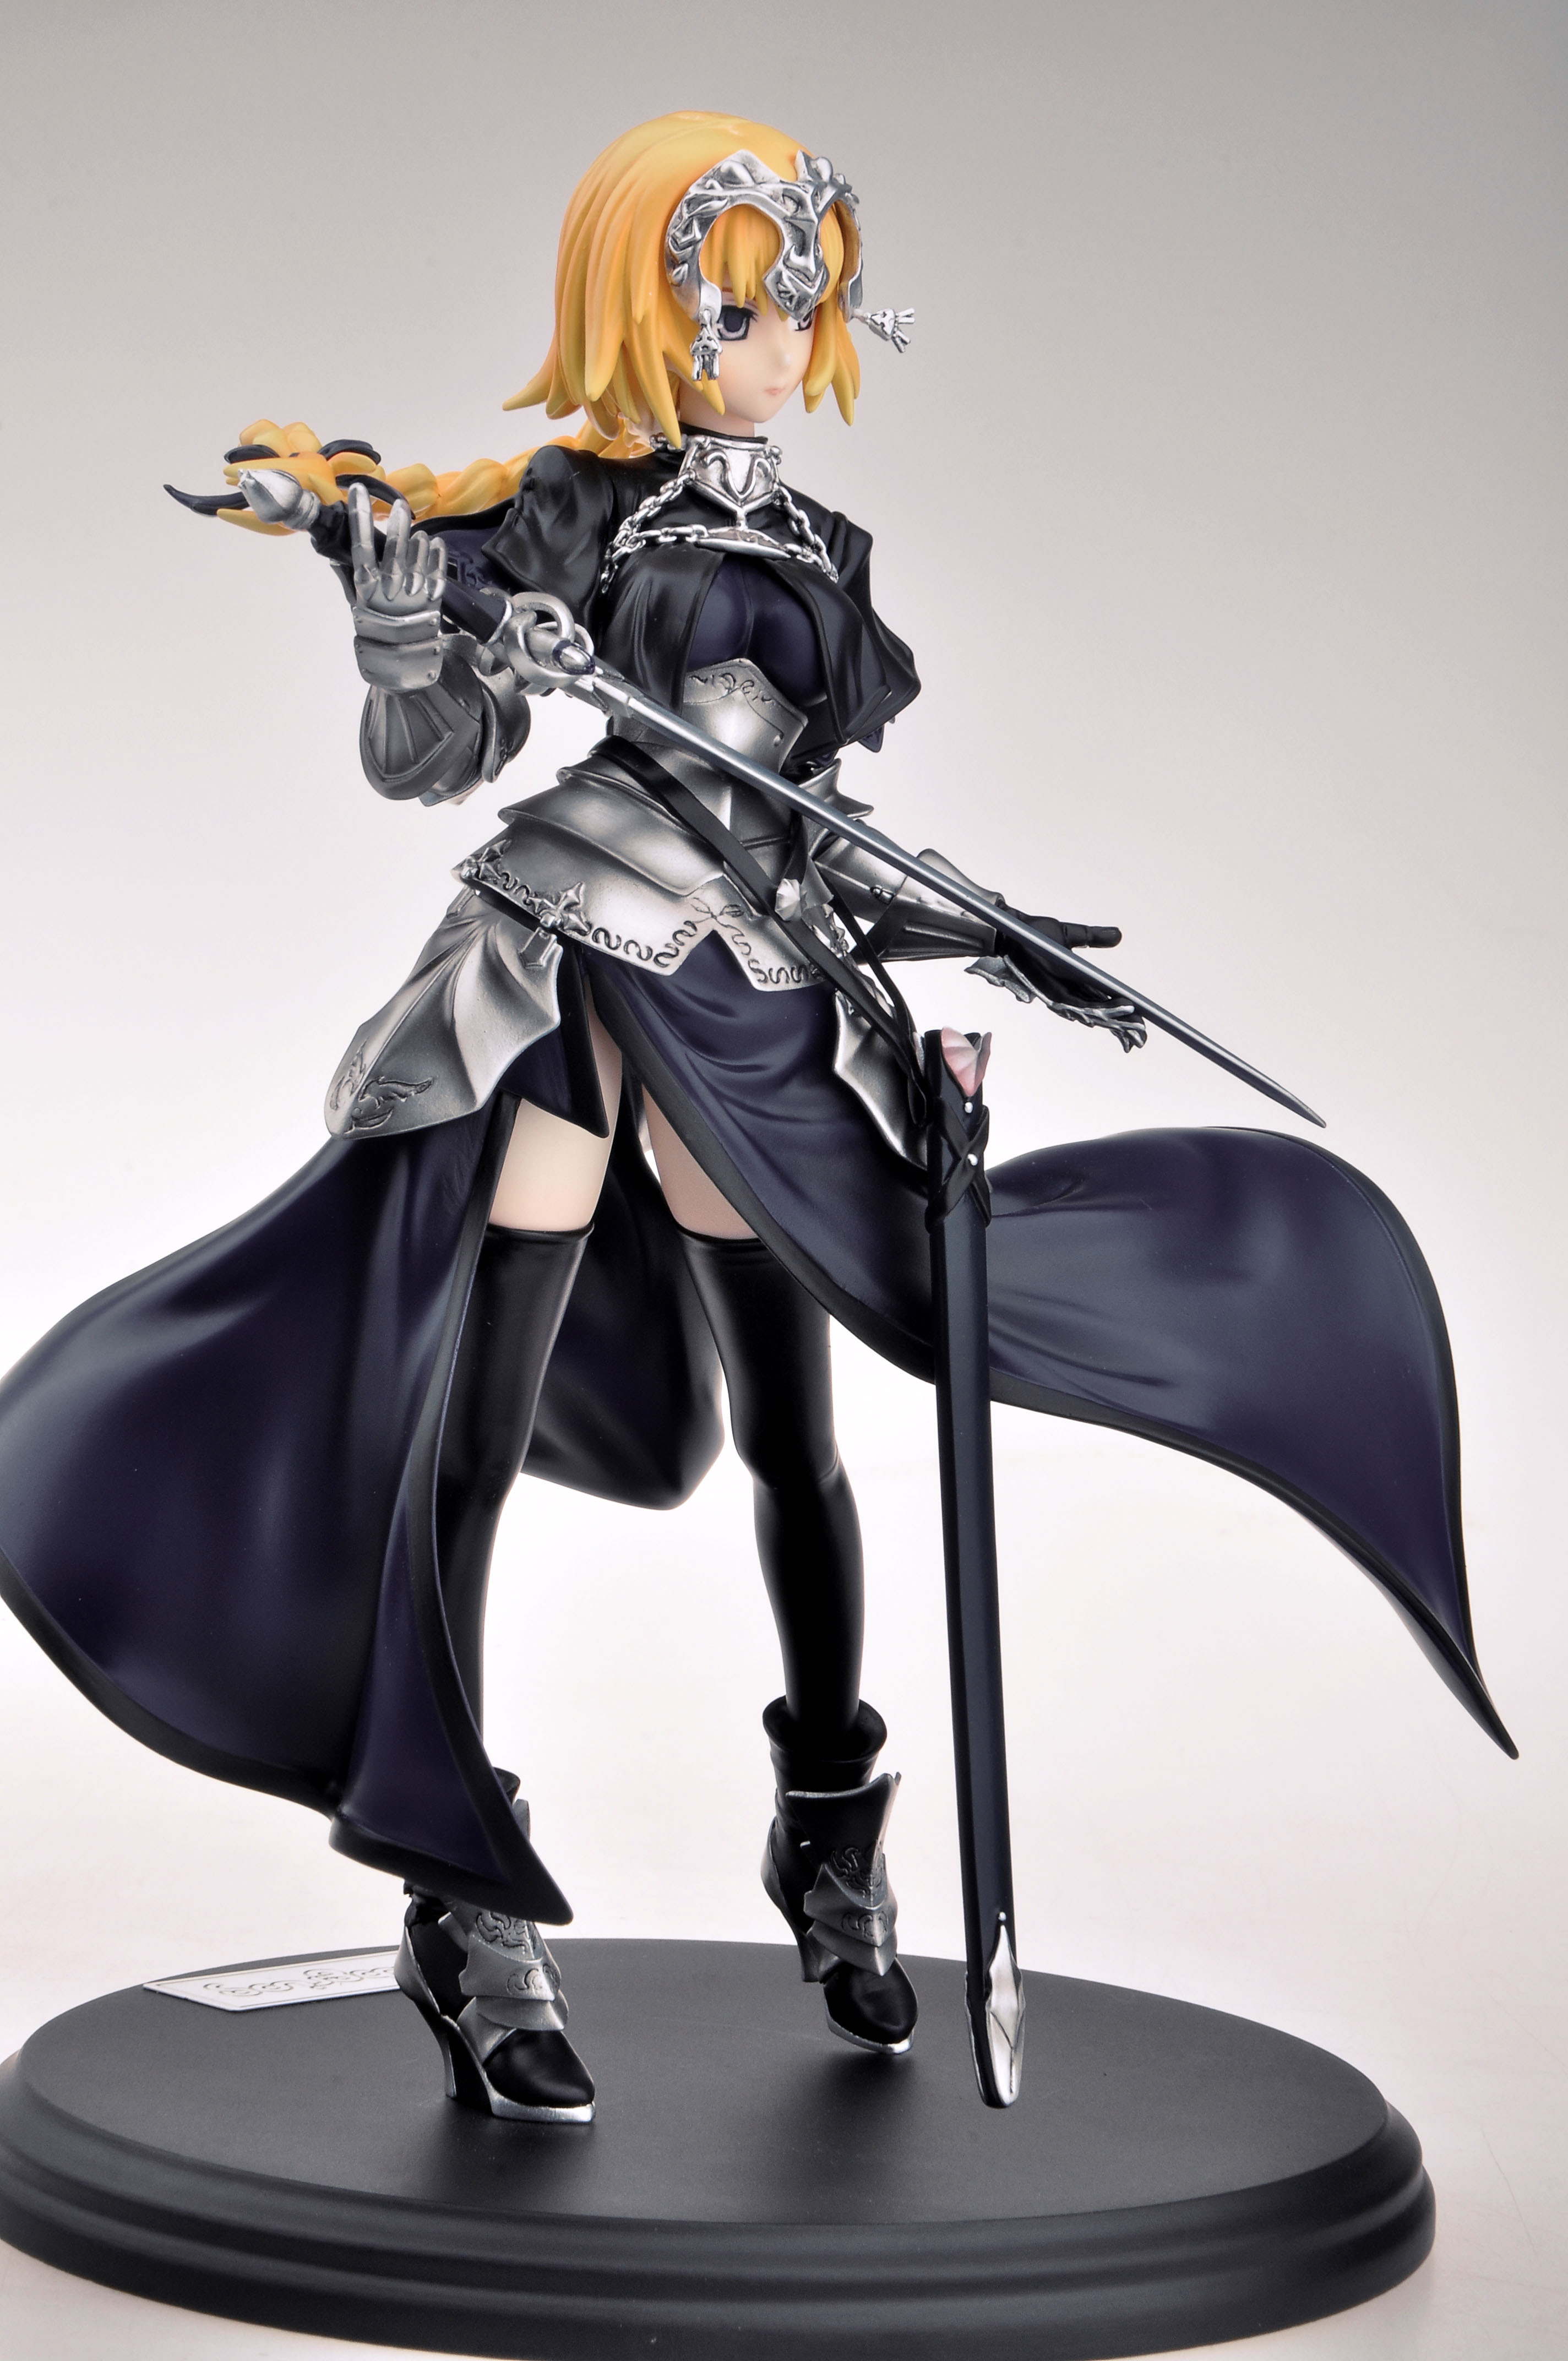 Fate/Apocrypha's Ruler Joins E2046's Gathering Collection - Haruhichan